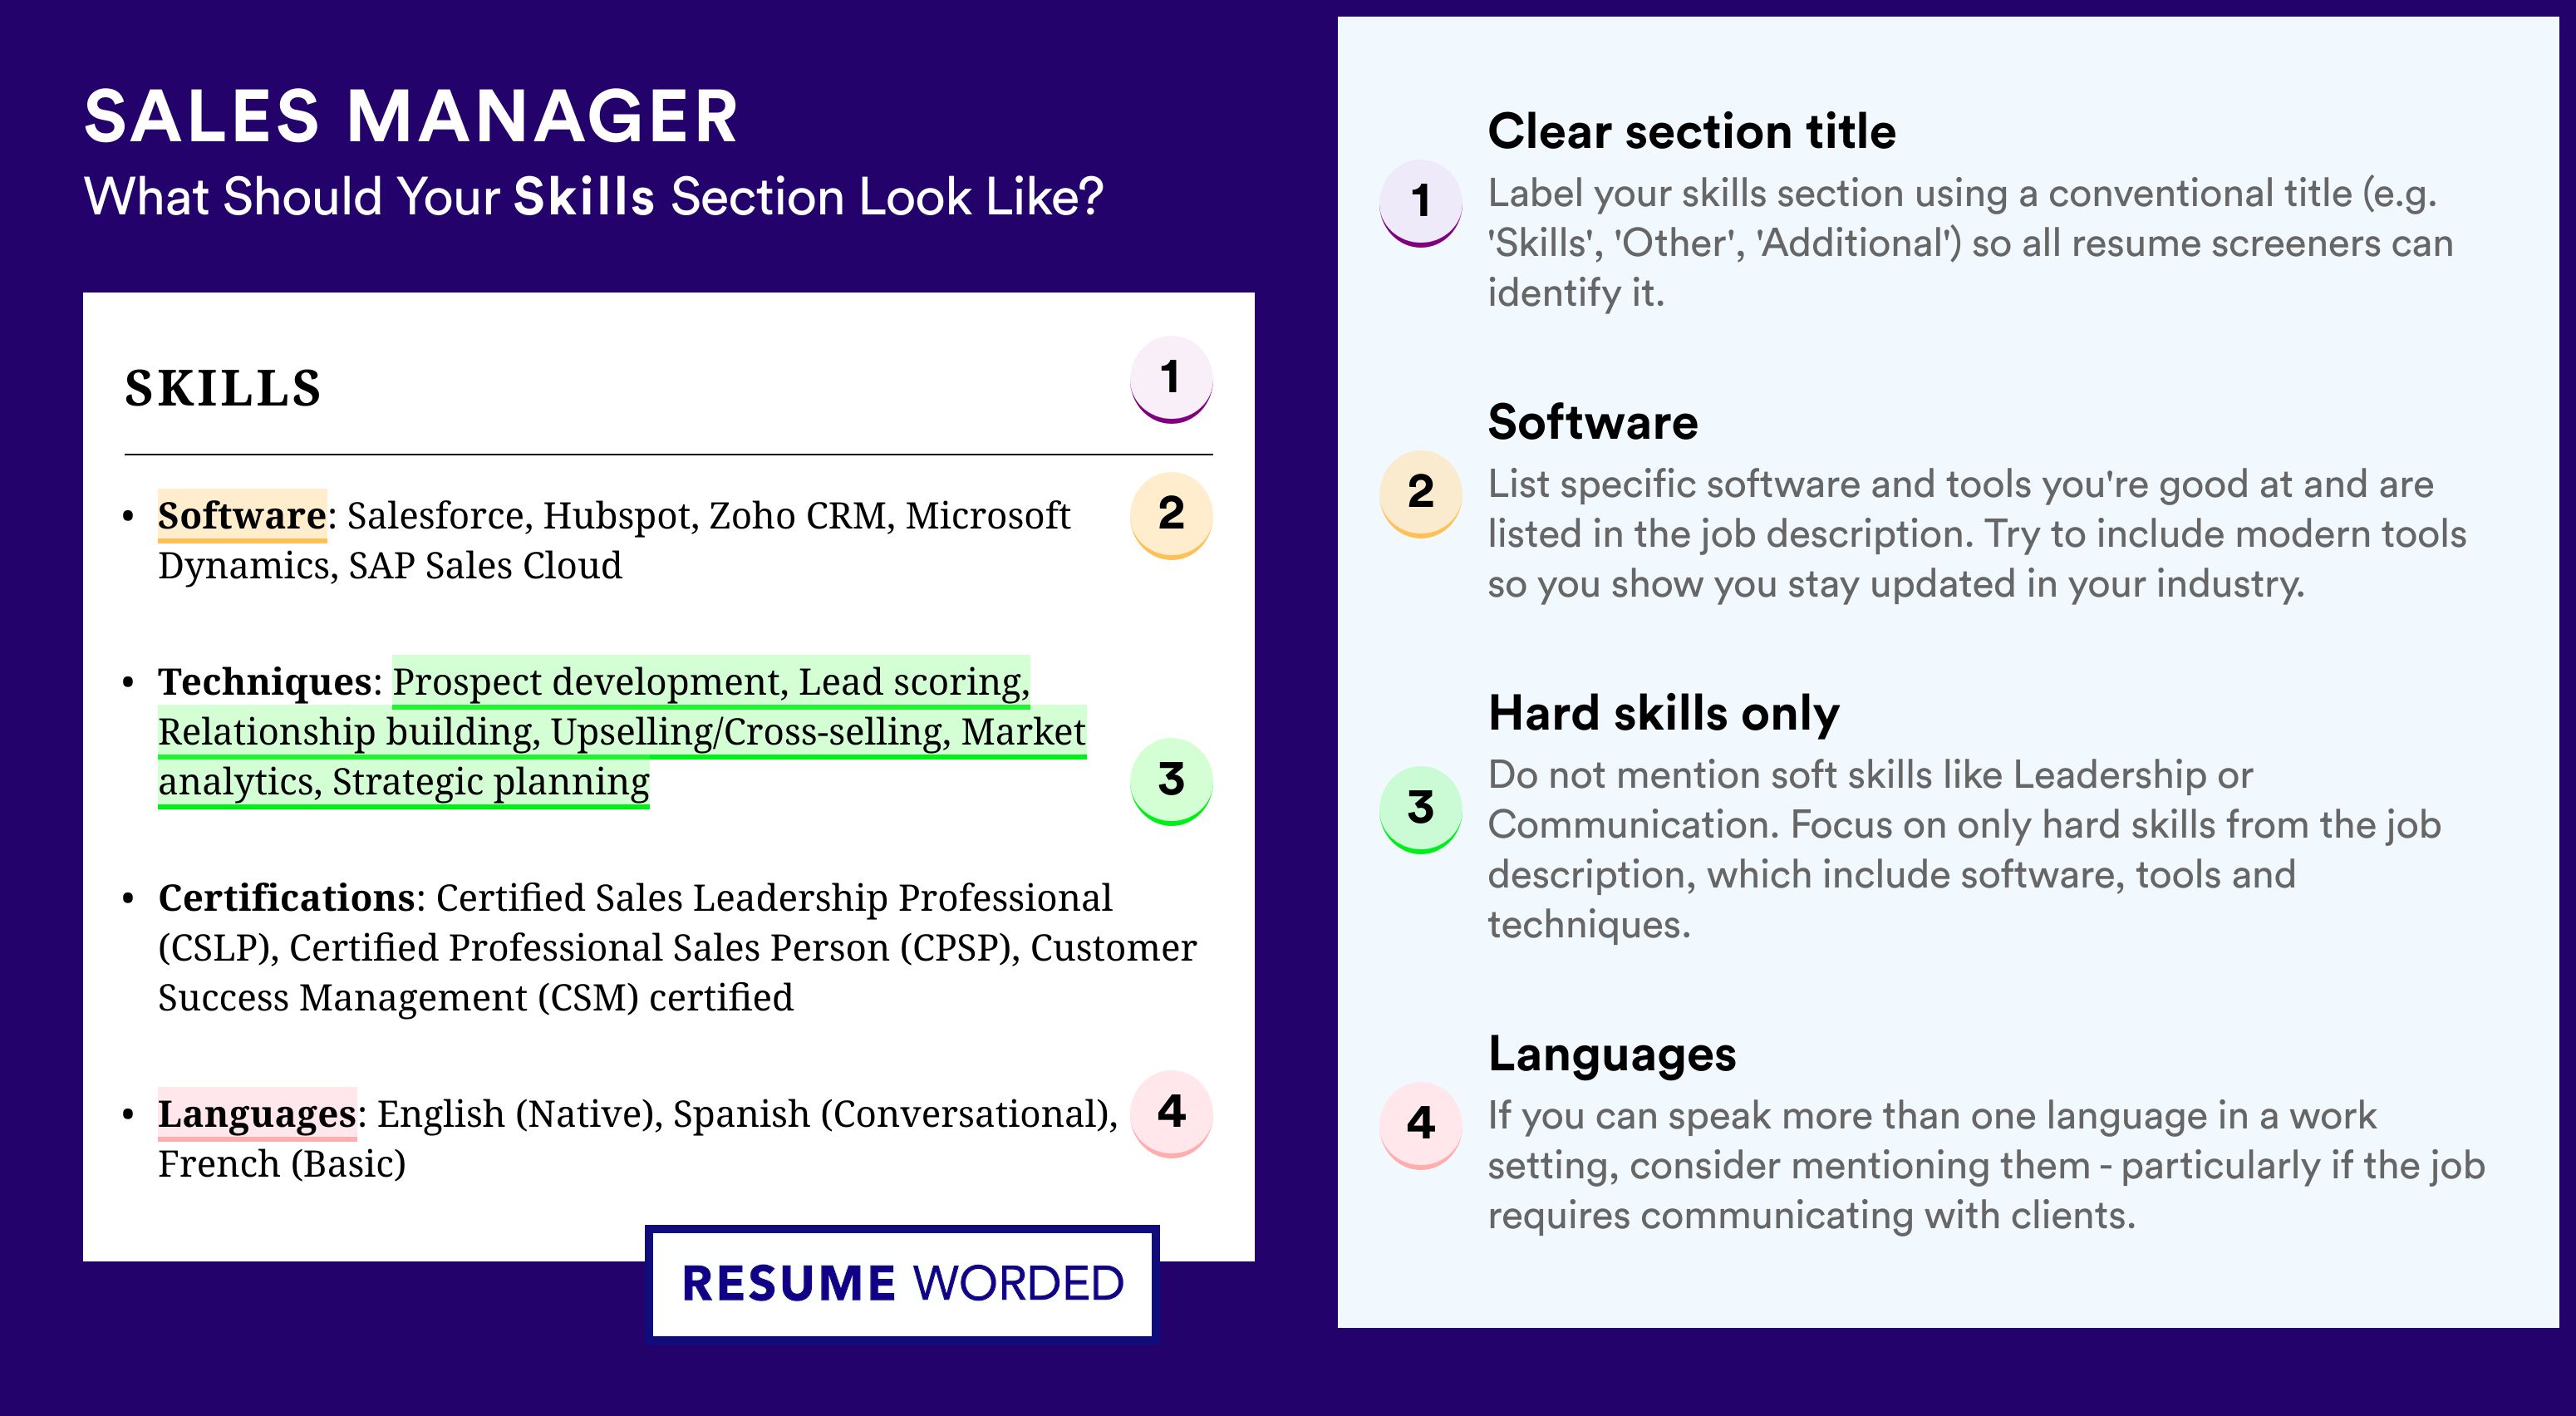 How To Write Your Skills Section - Sales Manager Roles